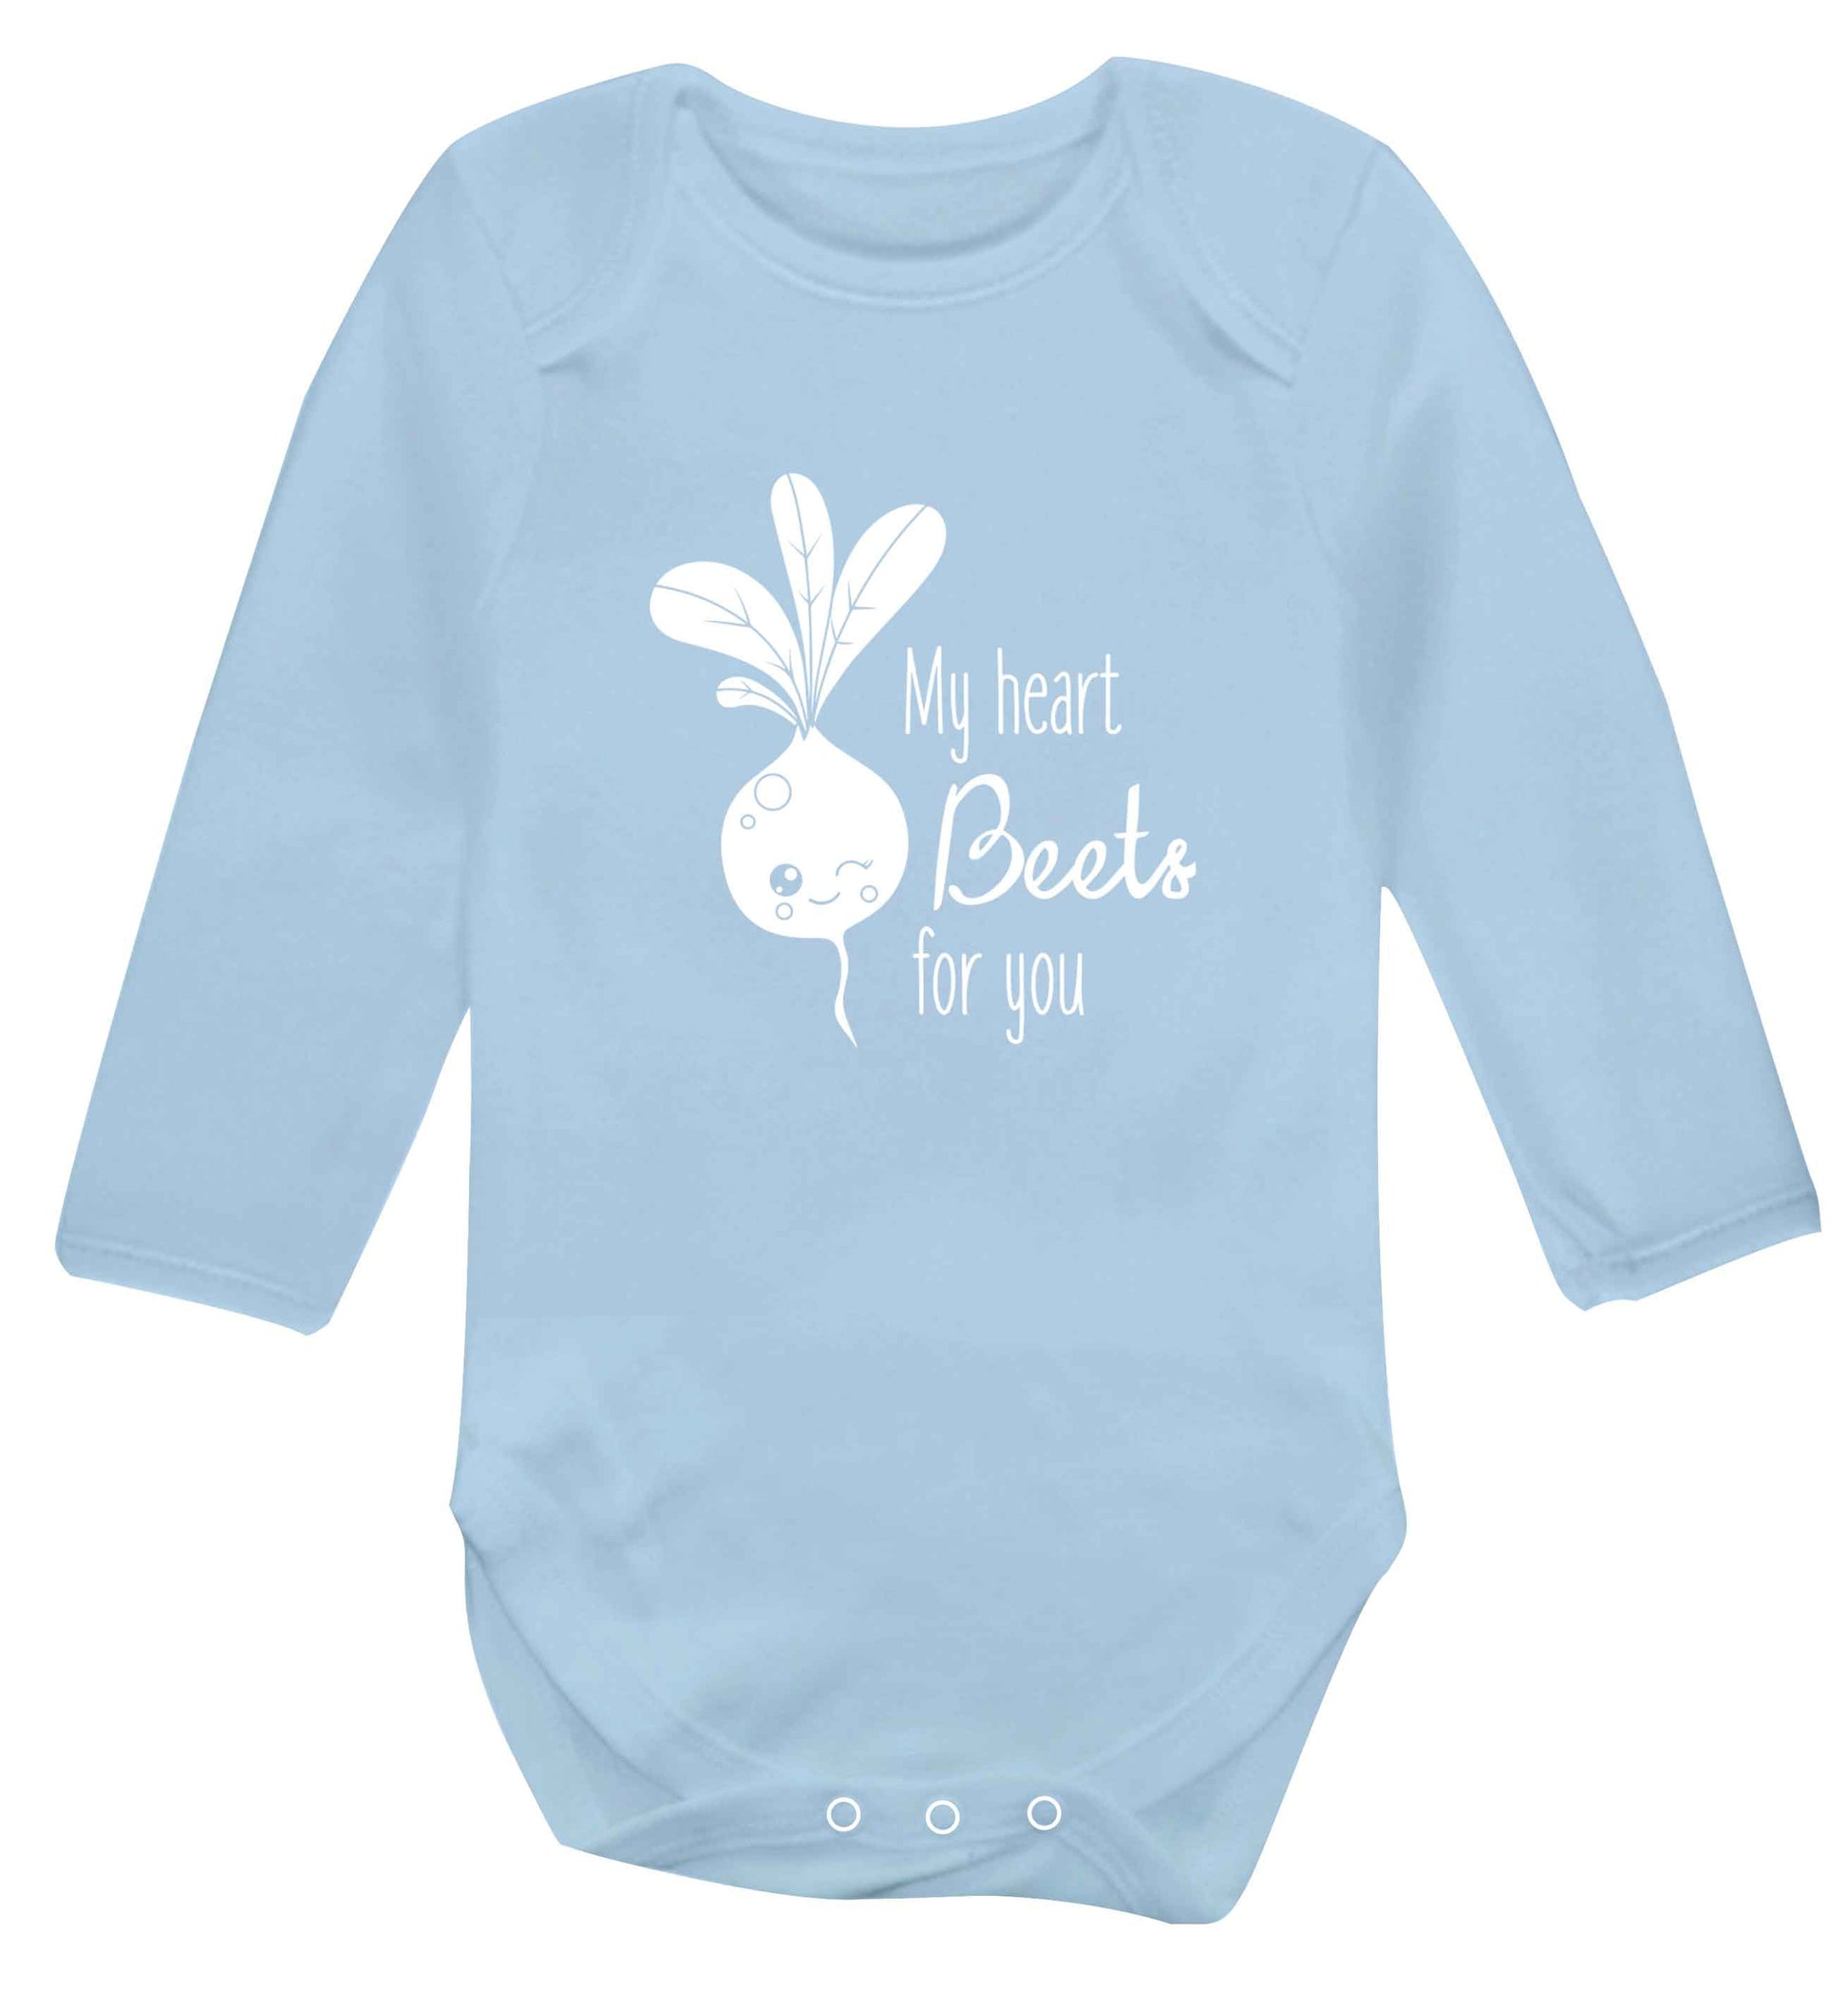 My heart beets for you baby vest long sleeved pale blue 6-12 months